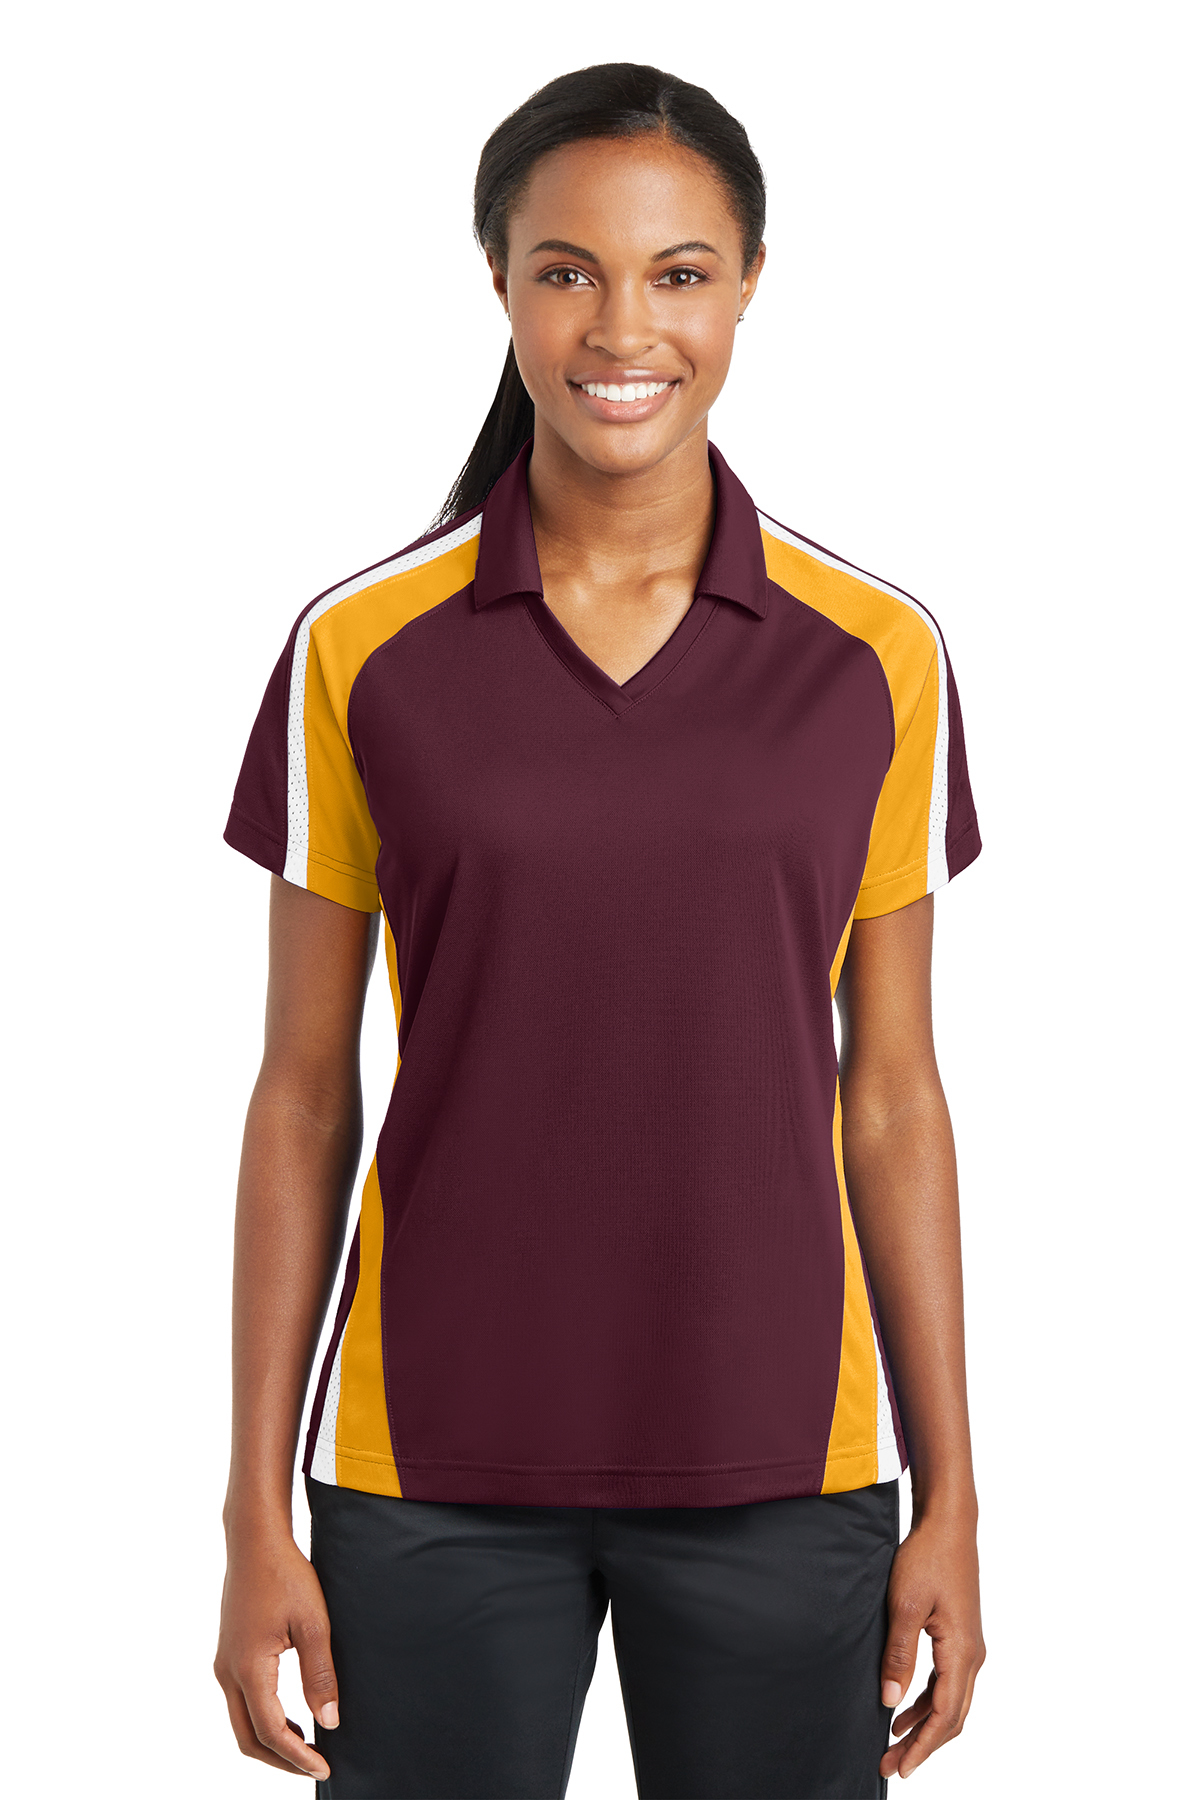 click to view Maroon/Gold/White